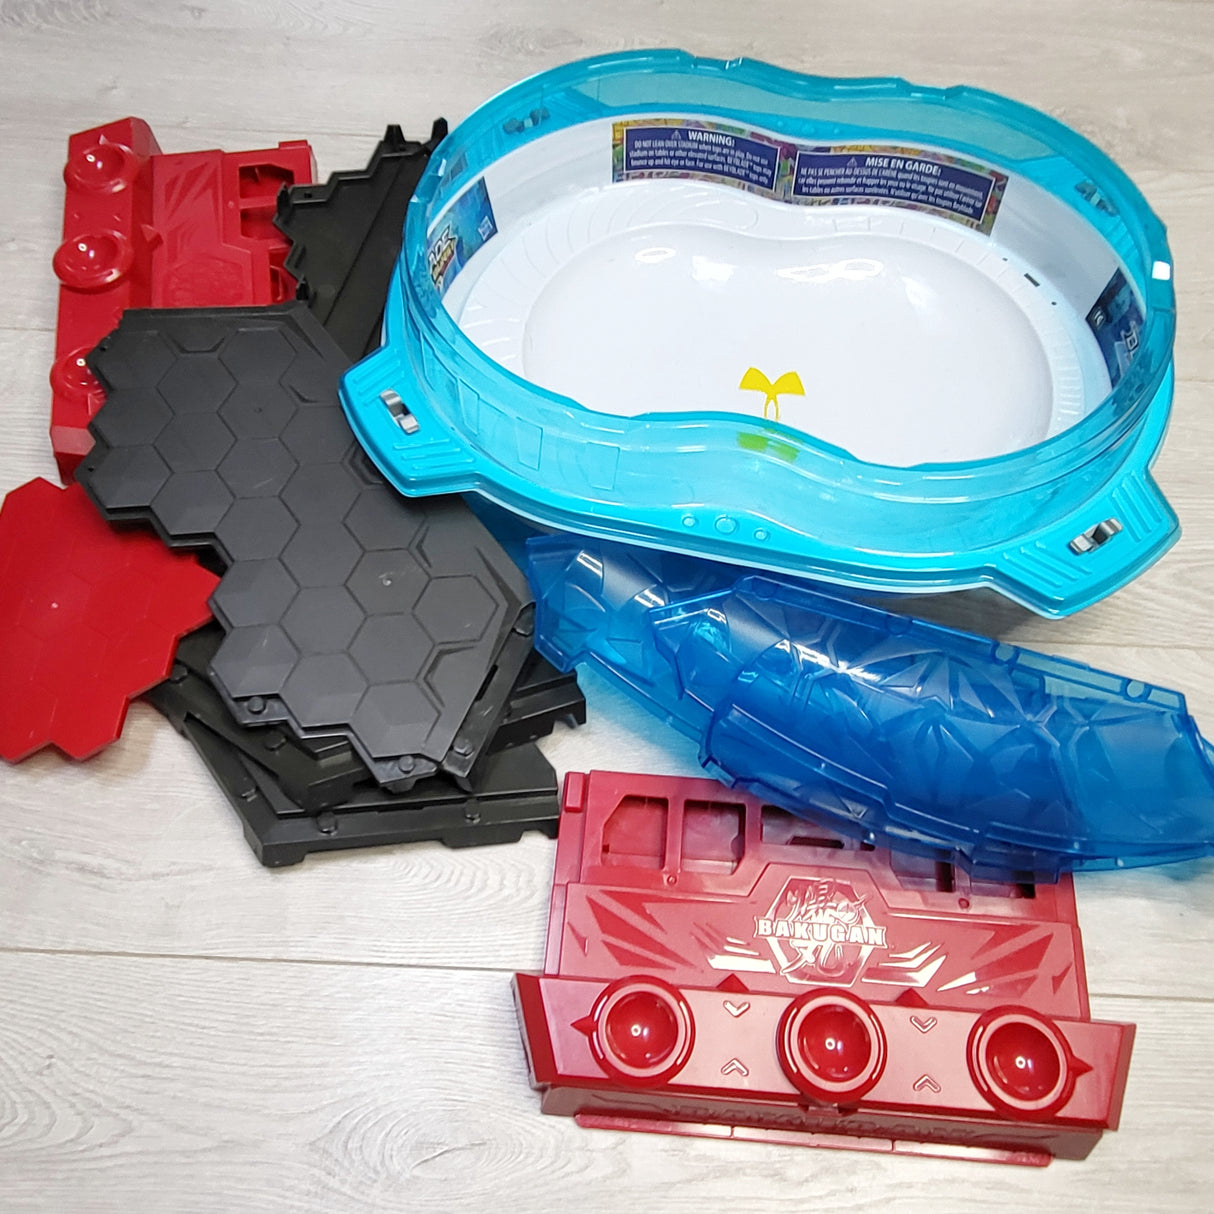 TCLW2 - Bakugan set - local pick up or delivery only